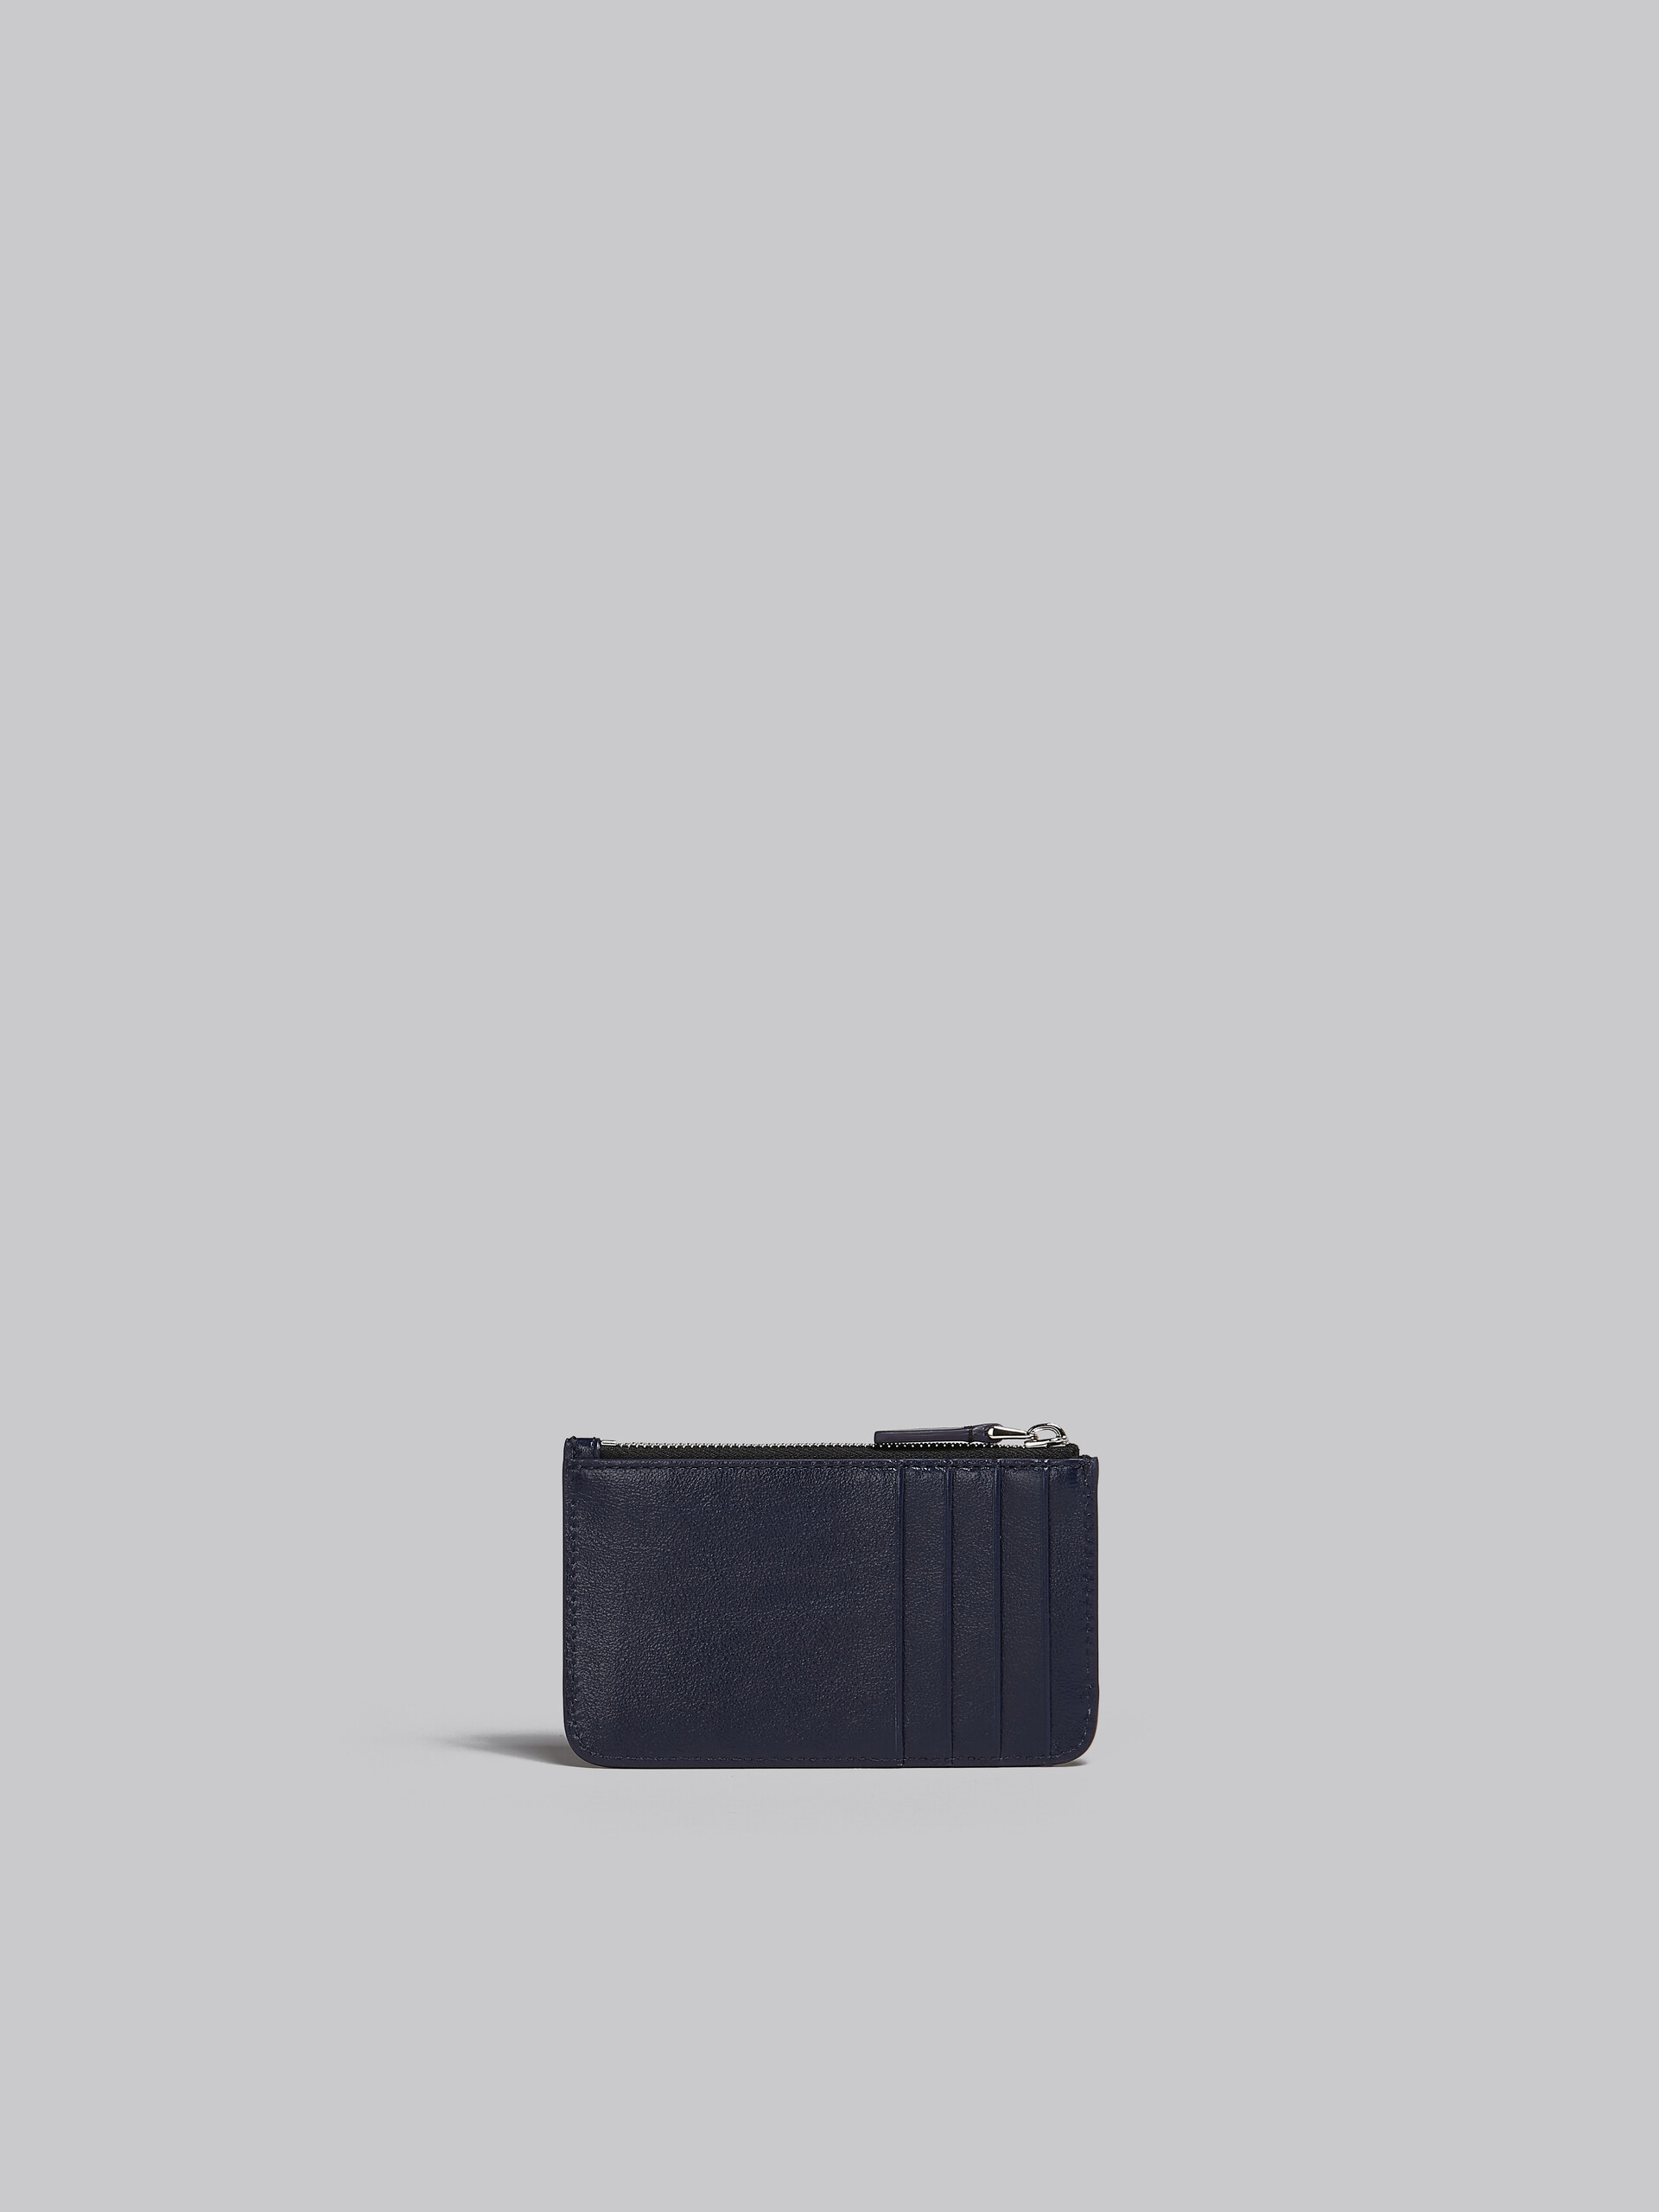 Navy blue and black leather card case - Wallets - Image 3